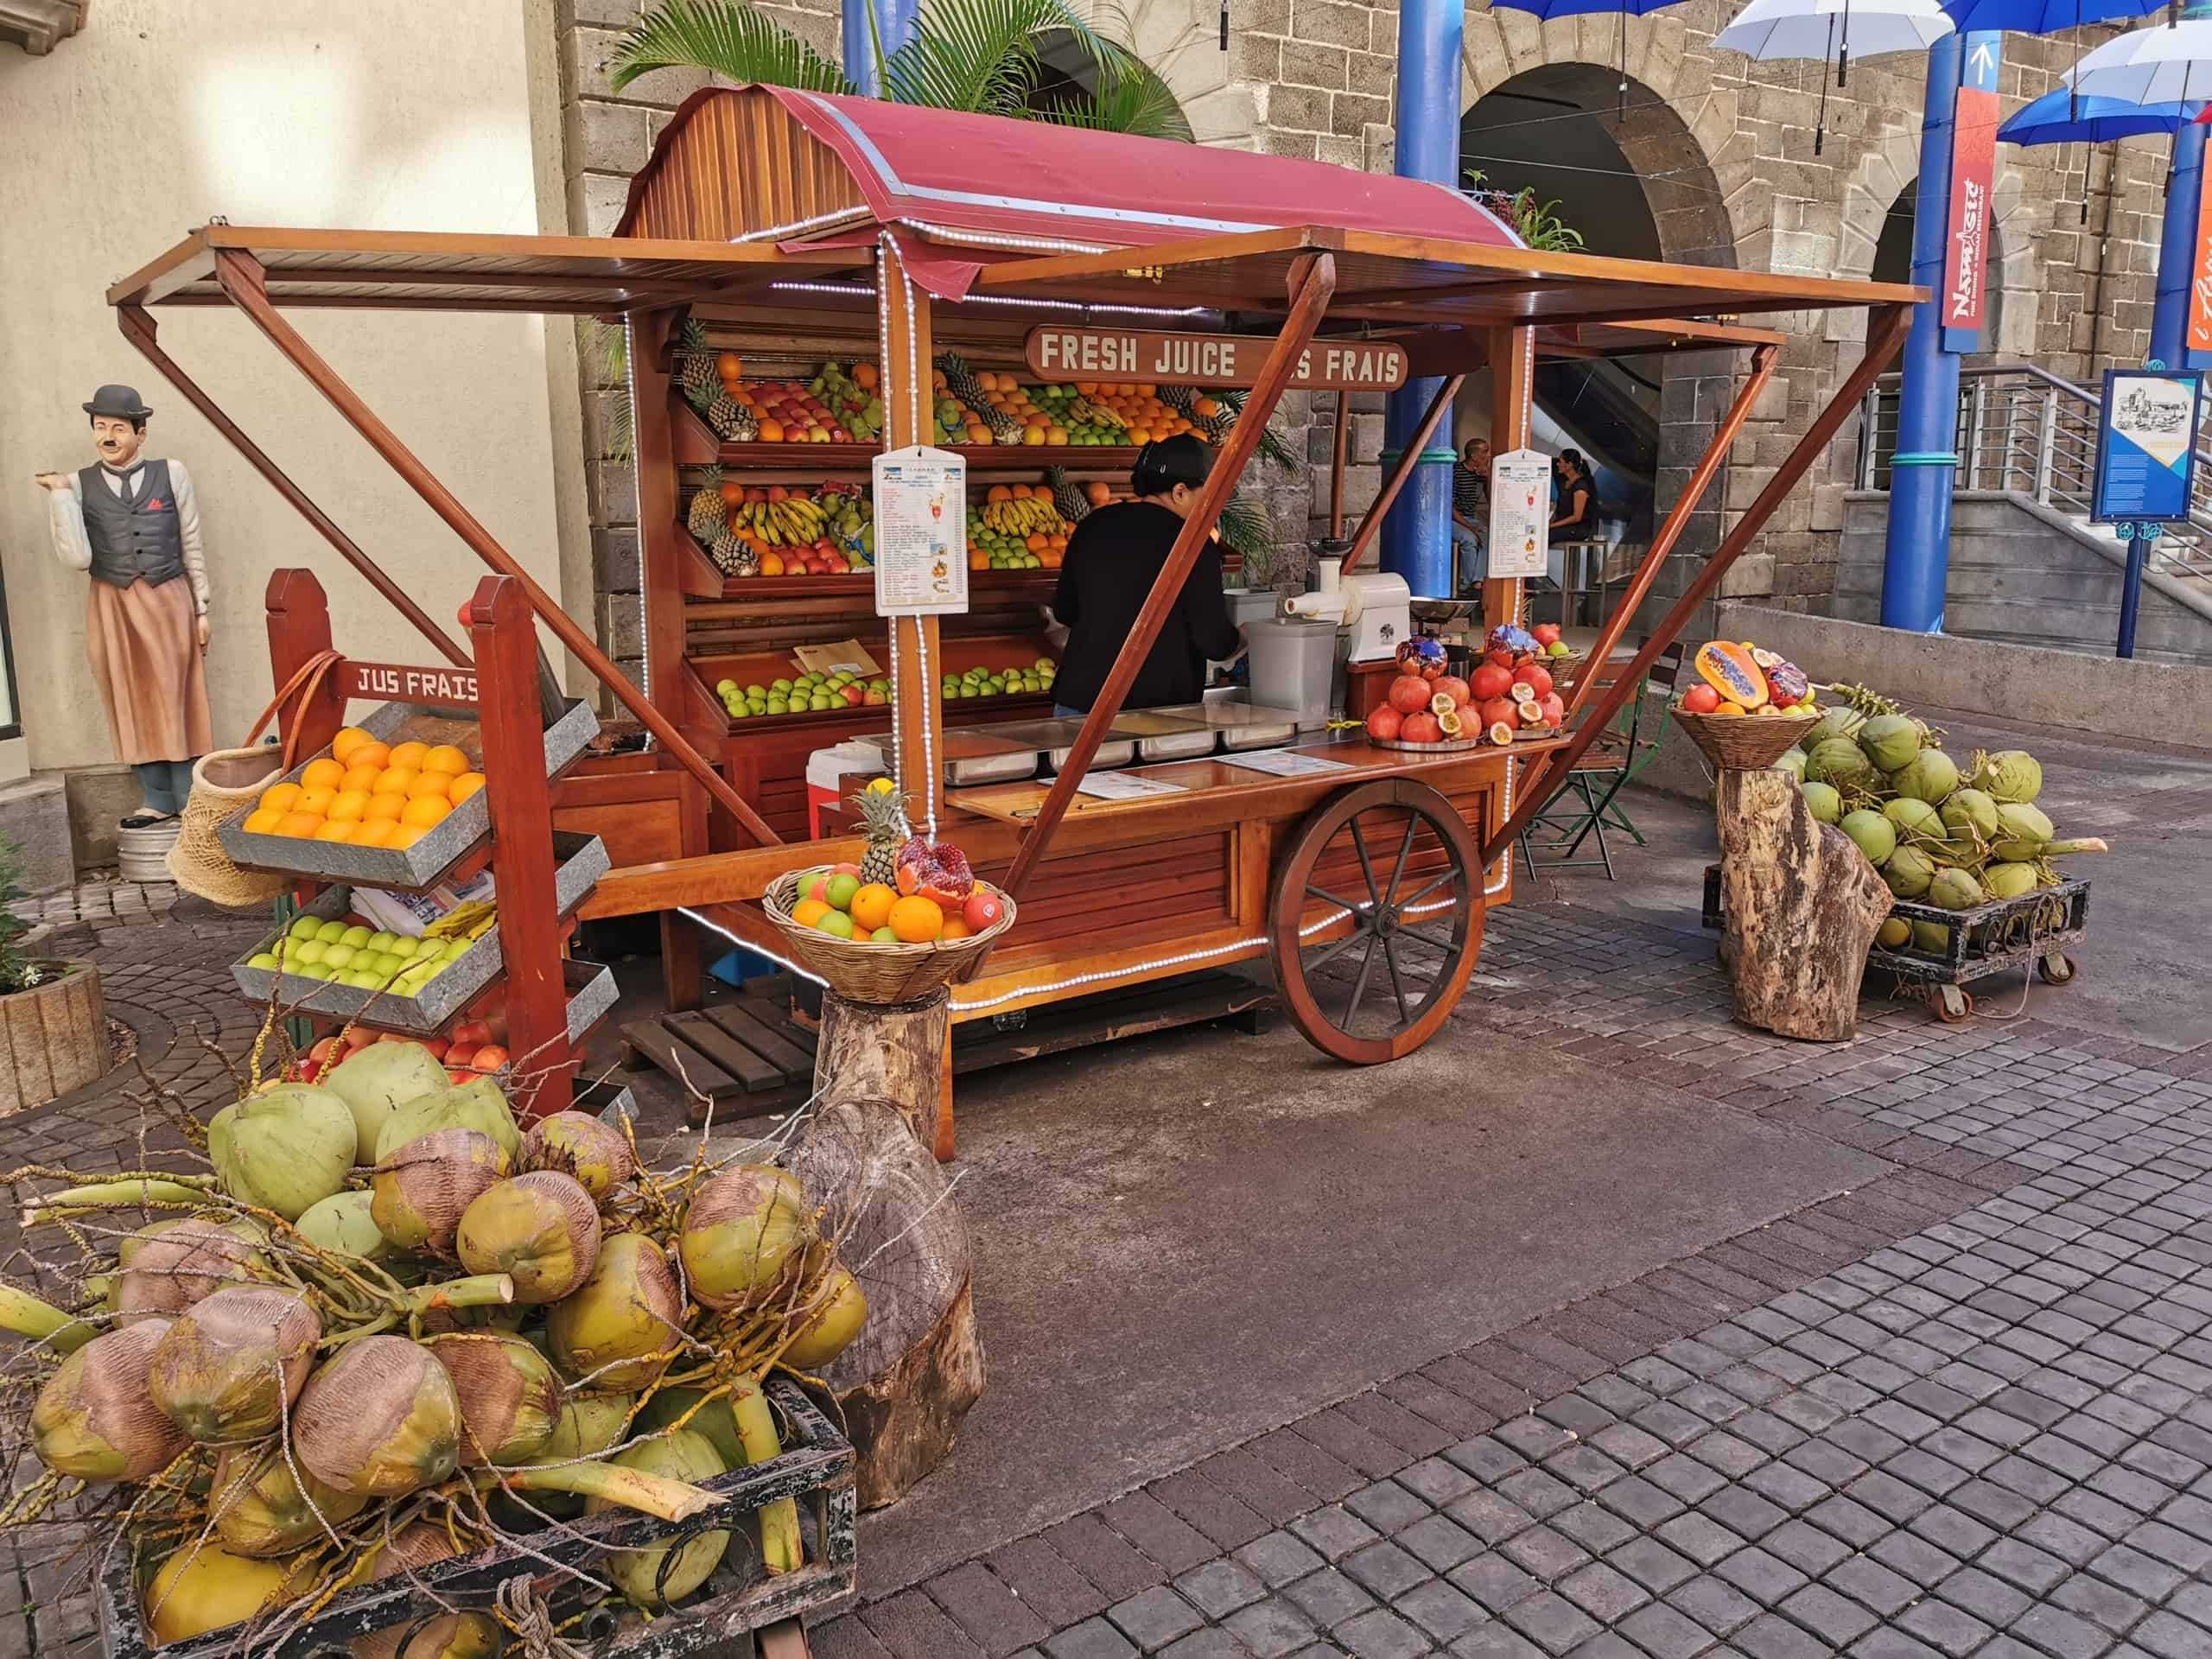 Fresh juice and fruit stand in Mauritius